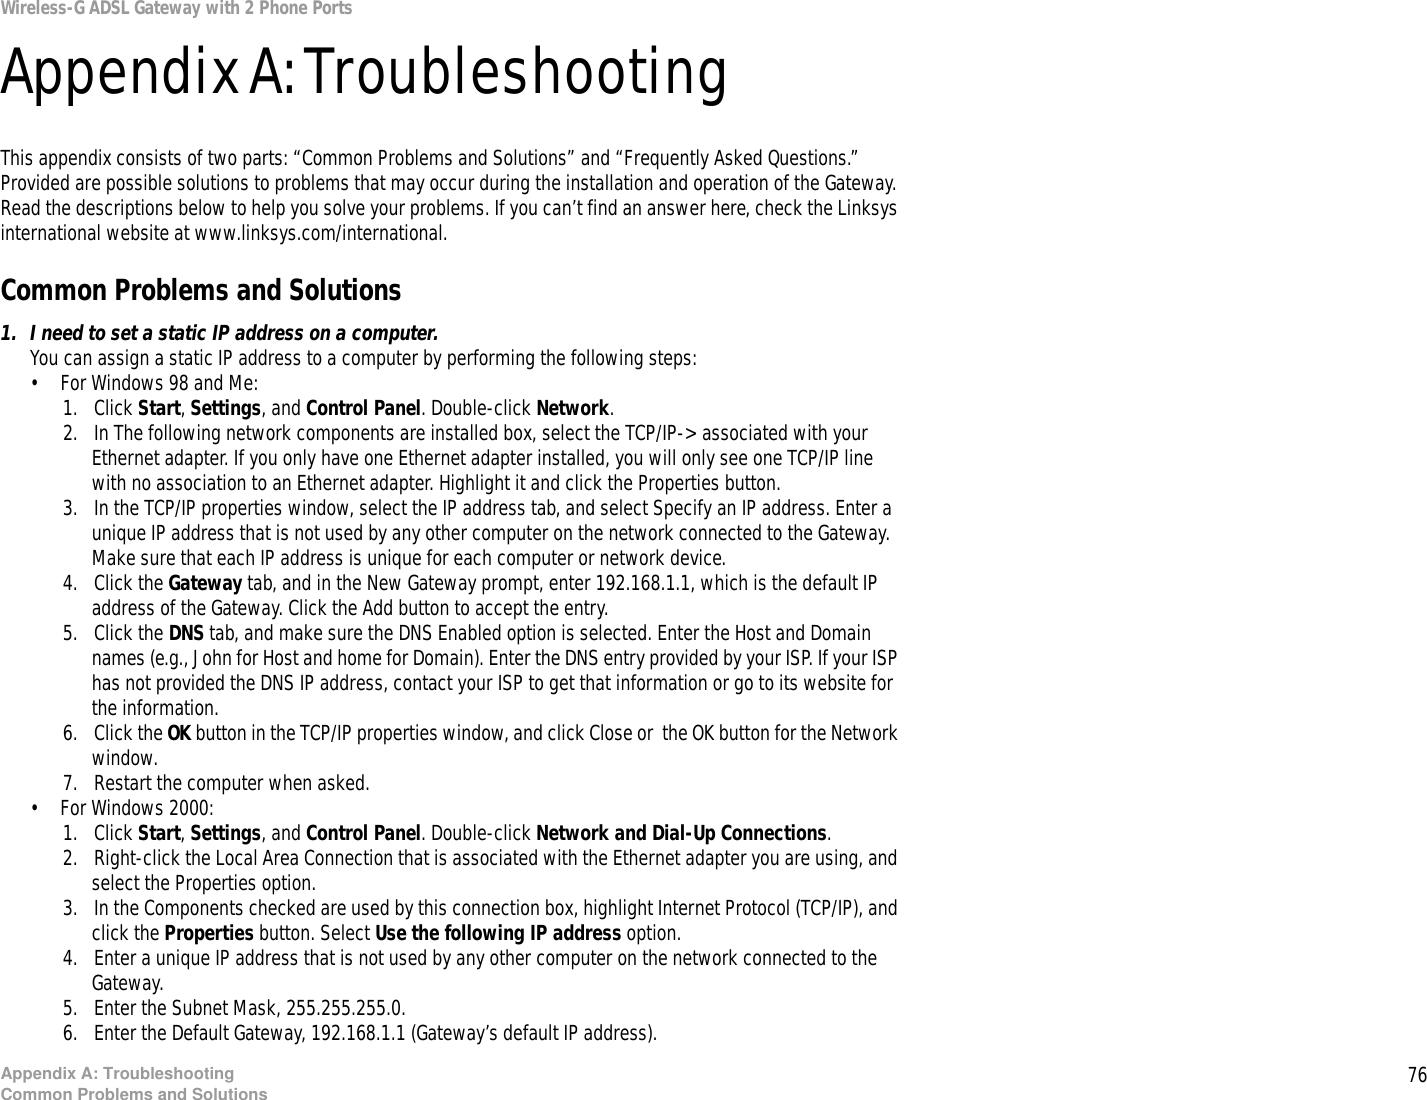 76Appendix A: TroubleshootingCommon Problems and SolutionsWireless-G ADSL Gateway with 2 Phone PortsAppendix A: TroubleshootingThis appendix consists of two parts: “Common Problems and Solutions” and “Frequently Asked Questions.” Provided are possible solutions to problems that may occur during the installation and operation of the Gateway. Read the descriptions below to help you solve your problems. If you can’t find an answer here, check the Linksys international website at www.linksys.com/international.Common Problems and Solutions1. I need to set a static IP address on a computer.You can assign a static IP address to a computer by performing the following steps:• For Windows 98 and Me:1. Click Start, Settings, and Control Panel. Double-click Network.2. In The following network components are installed box, select the TCP/IP-&gt; associated with your Ethernet adapter. If you only have one Ethernet adapter installed, you will only see one TCP/IP line with no association to an Ethernet adapter. Highlight it and click the Properties button.3. In the TCP/IP properties window, select the IP address tab, and select Specify an IP address. Enter a unique IP address that is not used by any other computer on the network connected to the Gateway. Make sure that each IP address is unique for each computer or network device.4. Click the Gateway tab, and in the New Gateway prompt, enter 192.168.1.1, which is the default IP address of the Gateway. Click the Add button to accept the entry.5. Click the DNS tab, and make sure the DNS Enabled option is selected. Enter the Host and Domain names (e.g., John for Host and home for Domain). Enter the DNS entry provided by your ISP. If your ISP has not provided the DNS IP address, contact your ISP to get that information or go to its website for the information.6. Click the OK button in the TCP/IP properties window, and click Close or  the OK button for the Network window.7. Restart the computer when asked.• For Windows 2000:1. Click Start, Settings, and Control Panel. Double-click Network and Dial-Up Connections.2. Right-click the Local Area Connection that is associated with the Ethernet adapter you are using, and select the Properties option.3. In the Components checked are used by this connection box, highlight Internet Protocol (TCP/IP), and click the Properties button. Select Use the following IP address option.4. Enter a unique IP address that is not used by any other computer on the network connected to the Gateway. 5. Enter the Subnet Mask, 255.255.255.0.6. Enter the Default Gateway, 192.168.1.1 (Gateway’s default IP address). 